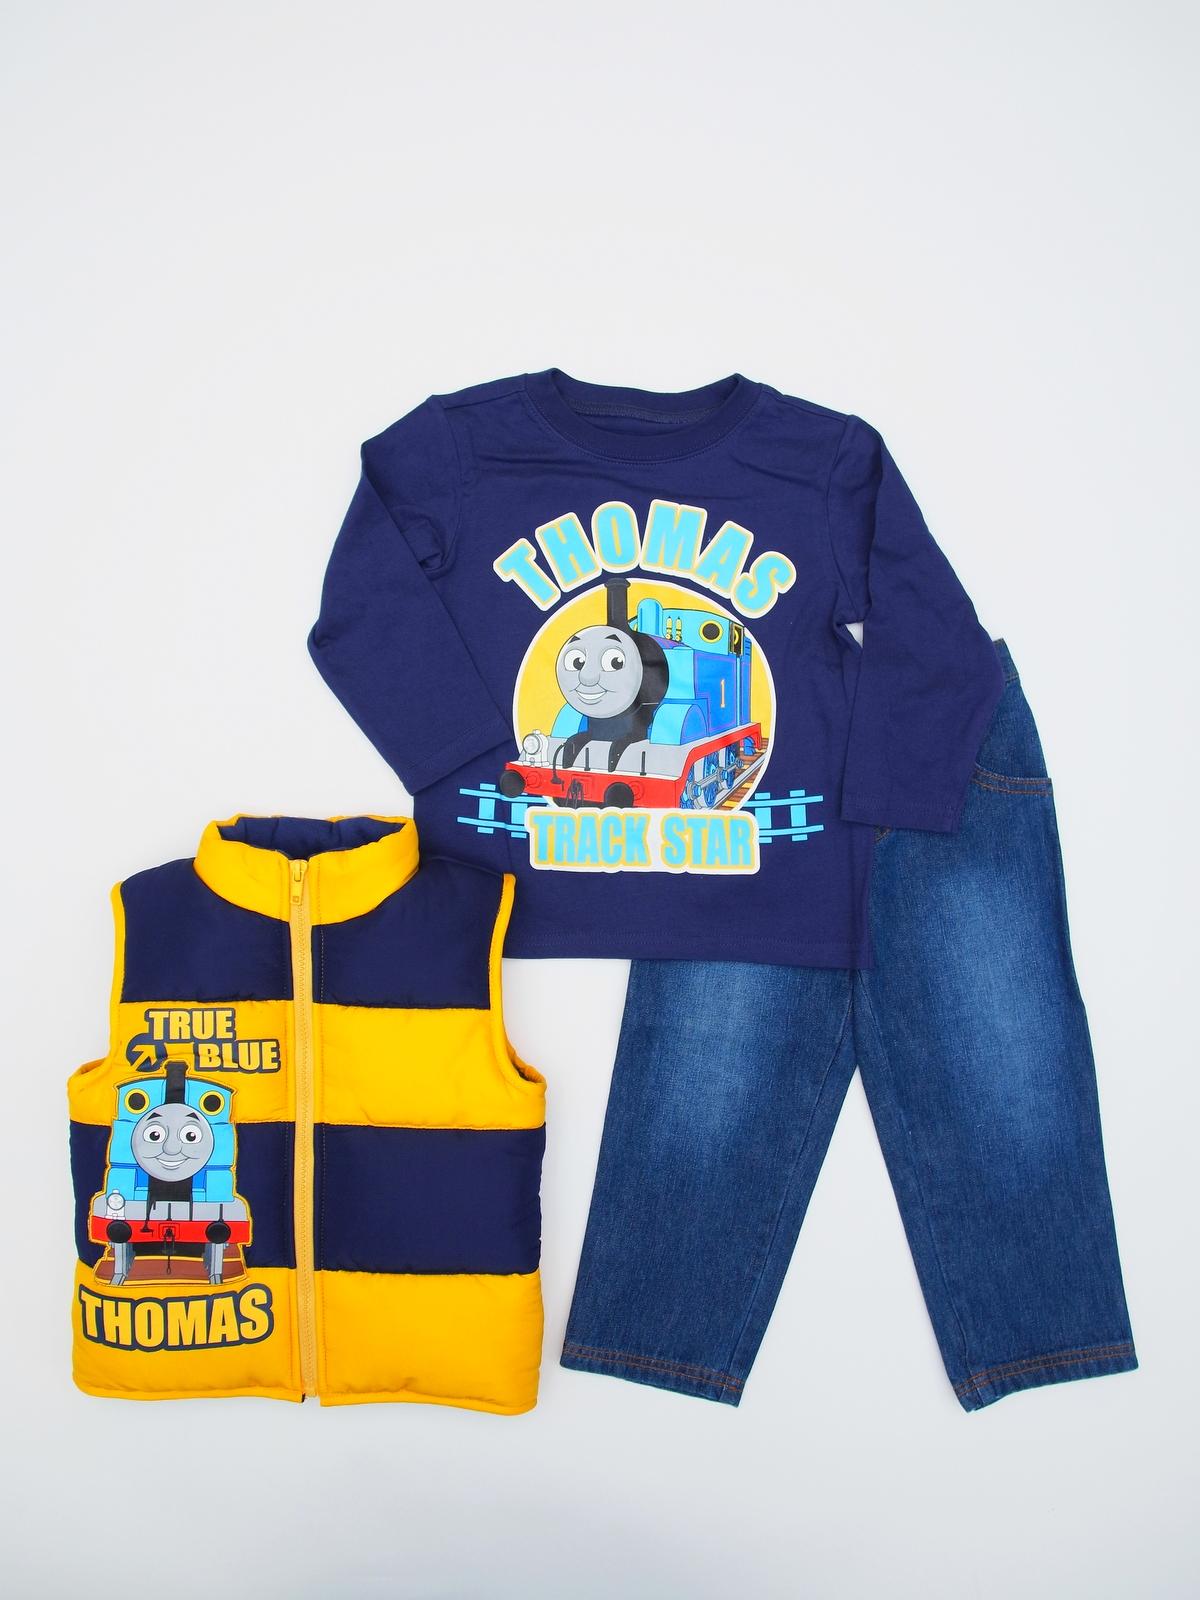 Nickelodeon Thomas the Tank Engine Infant & Toddler Boy's Vest  T-Shirt & Jeans